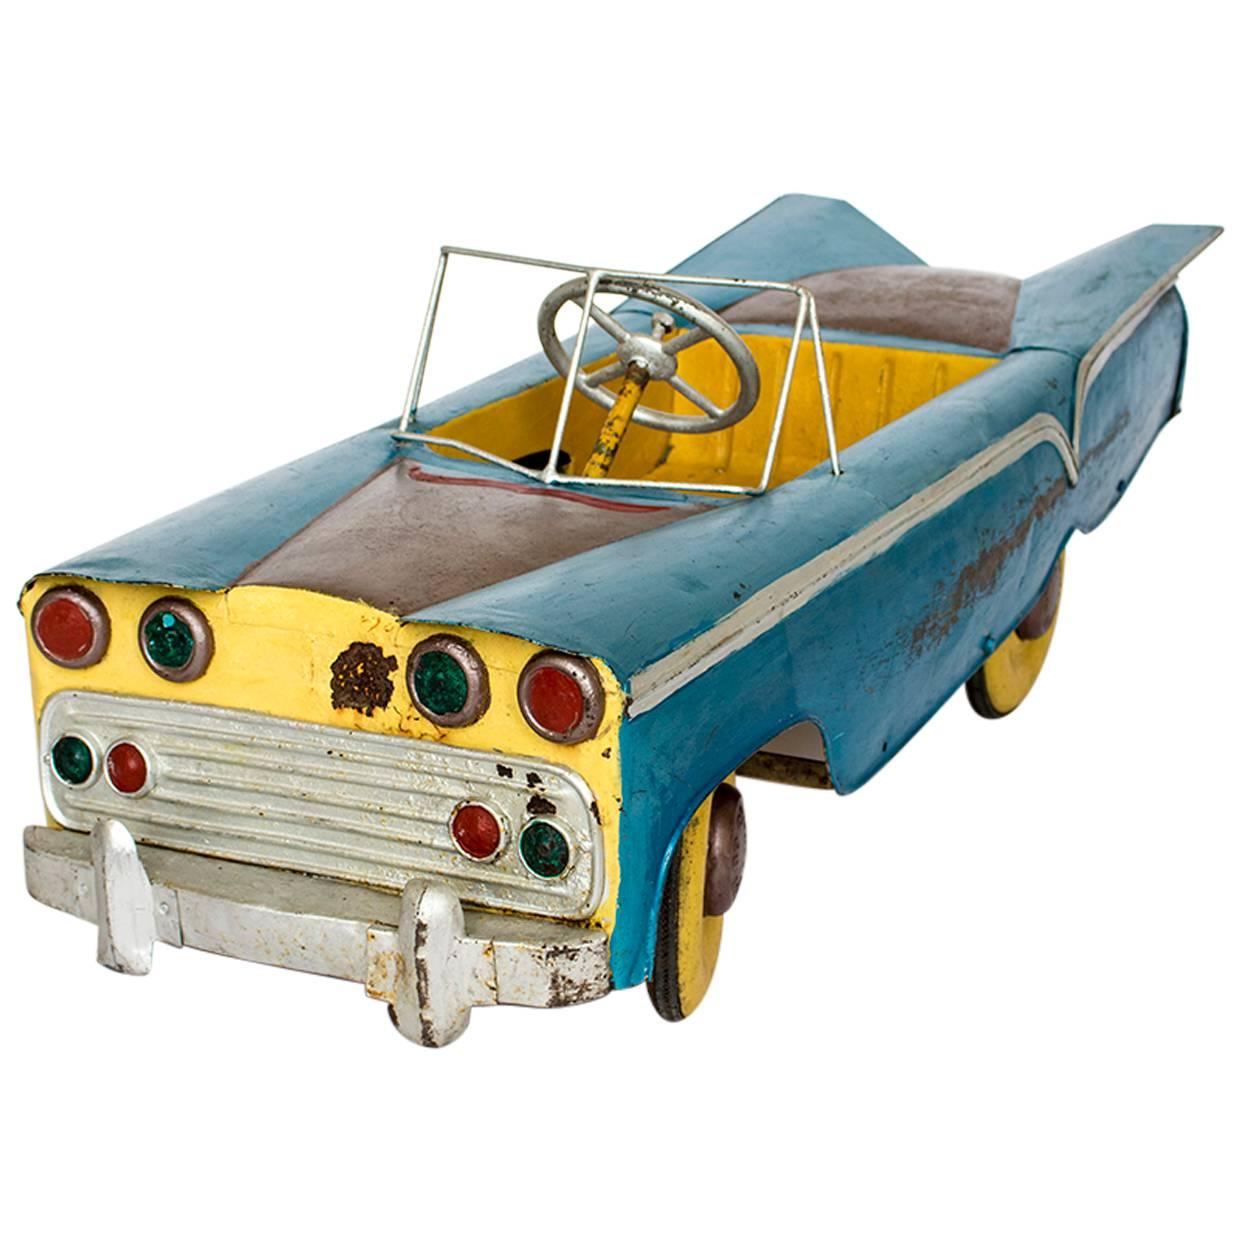 Unusual Burmese Painted Model Pedal Car, circa 1950s -1960s Childs Toy im Angebot